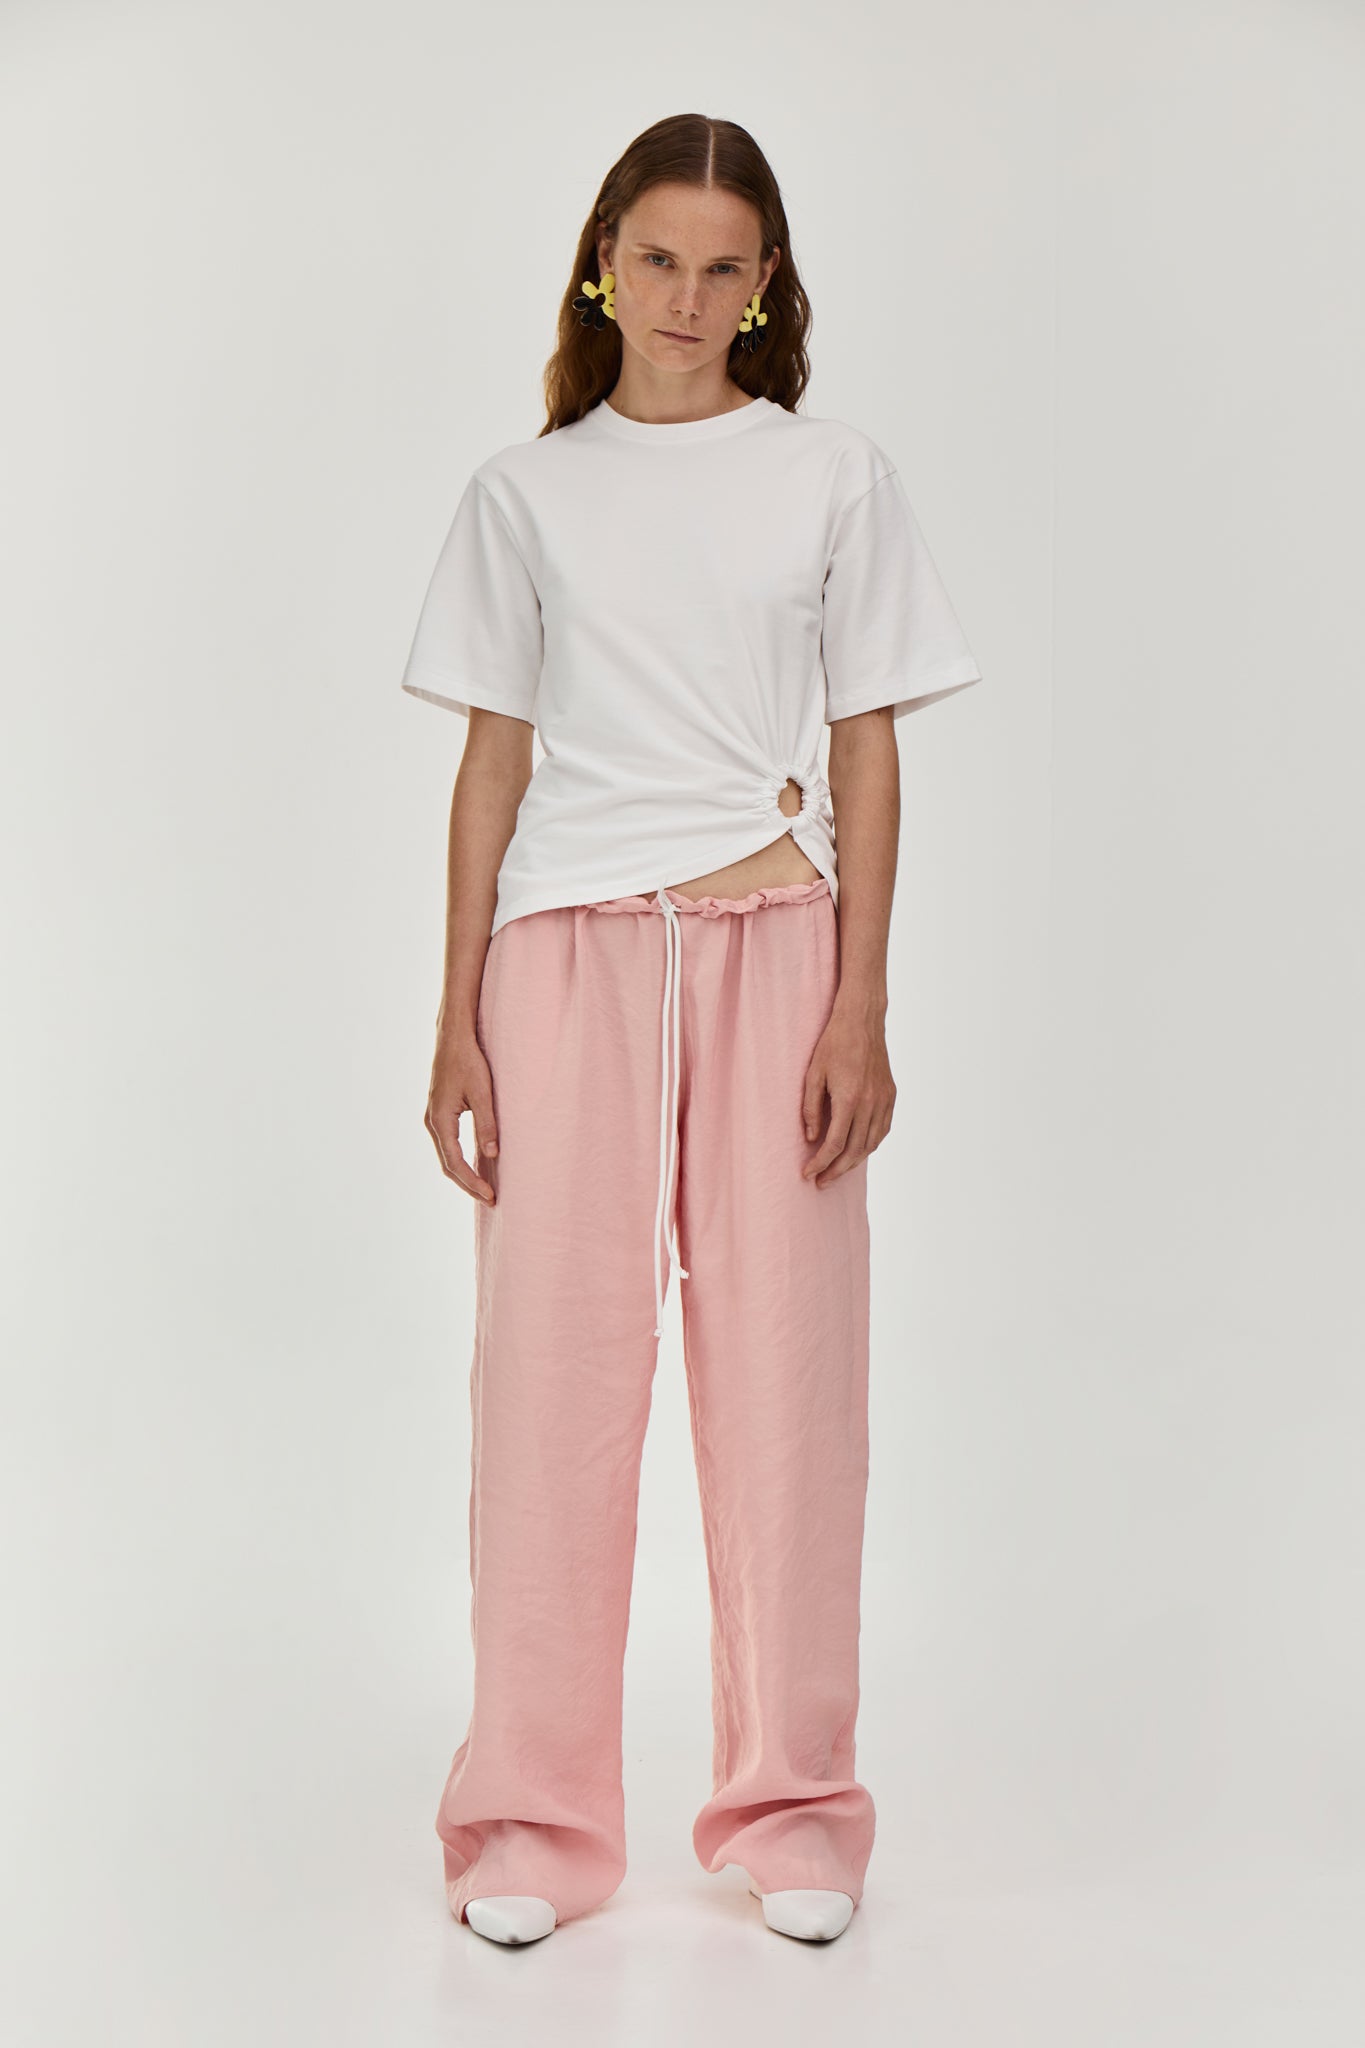 Viscose blend trousers featuring a drawstring fastening waist, side pockets and a long length from FORMA brand